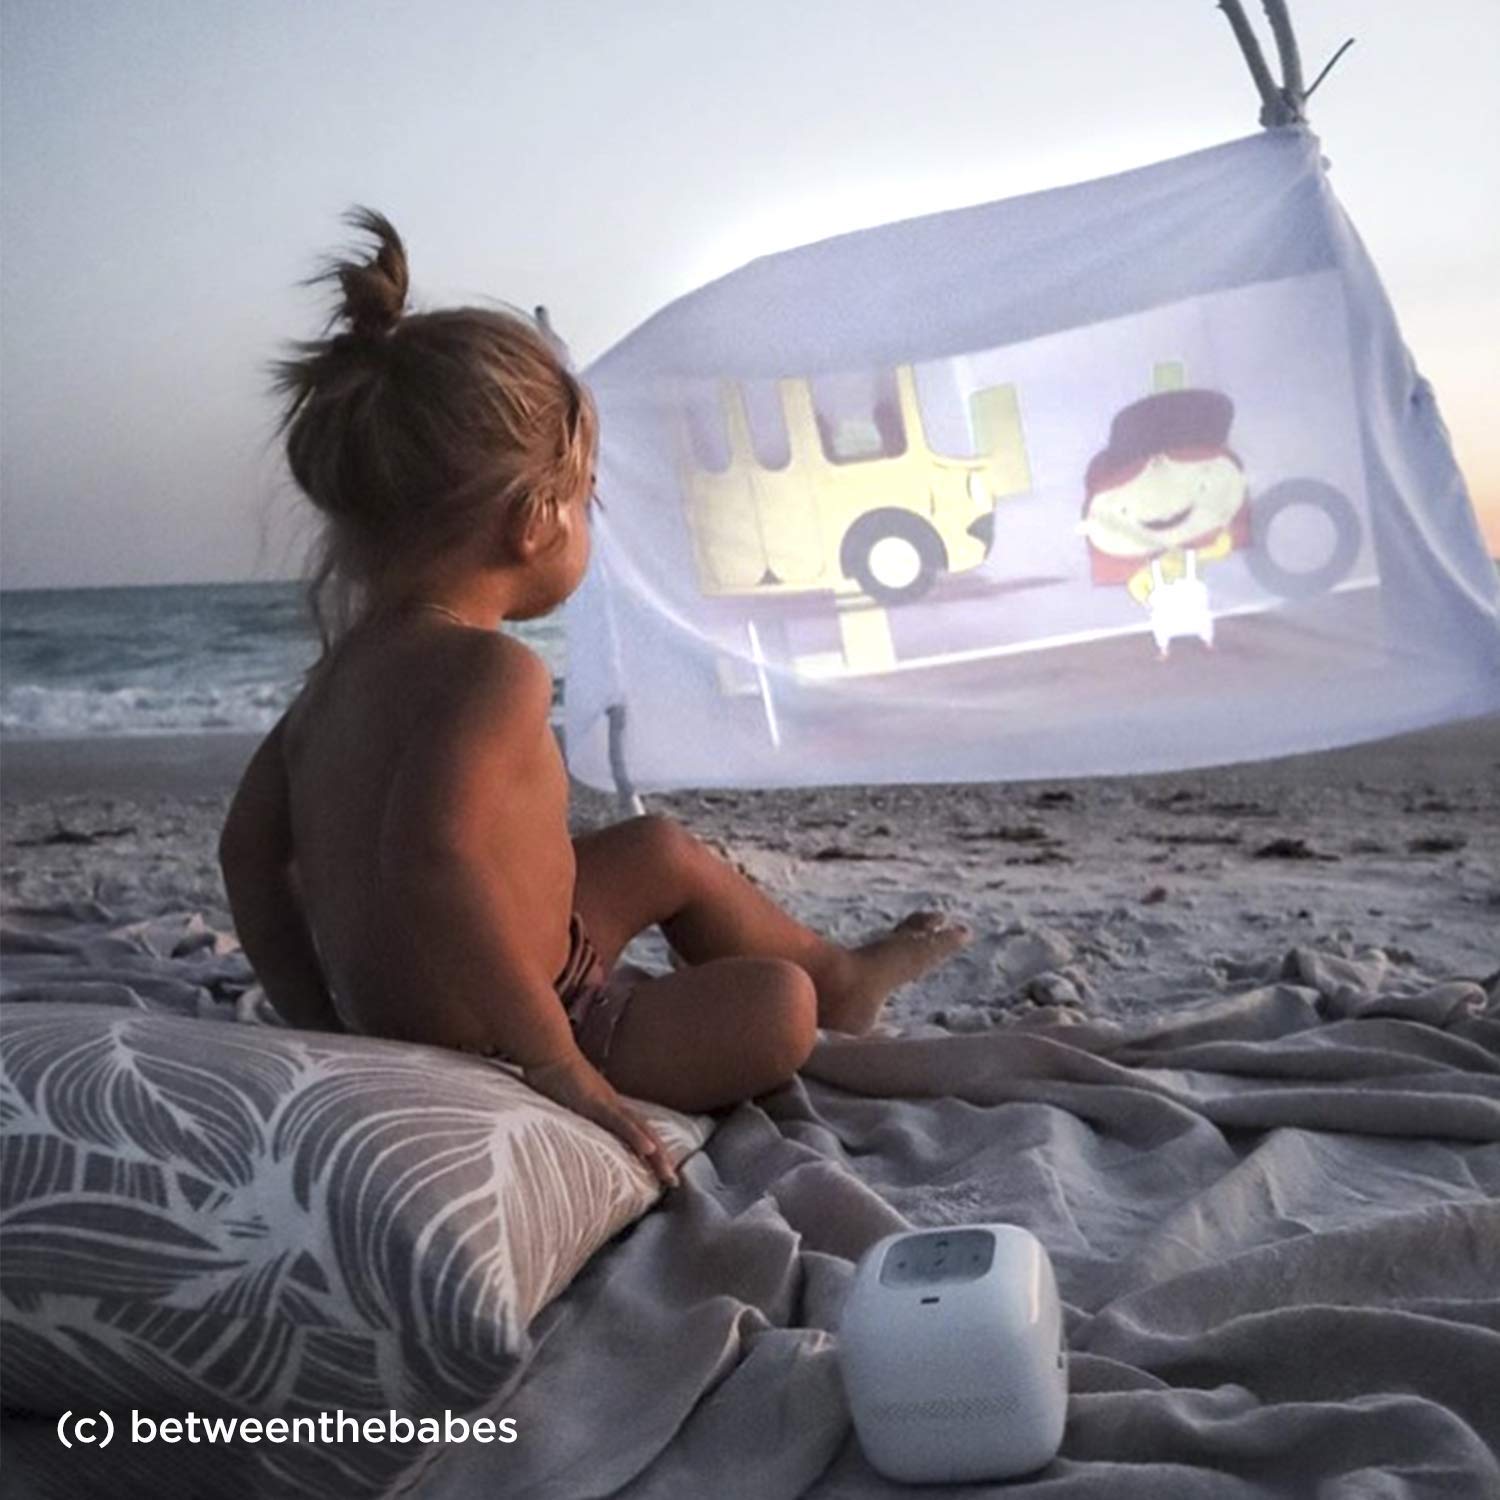 CINEMOOD Portable Movie Theater - Includes Educational Disney Content, Streams Netflix and Youtube - Anytime, Anyplace